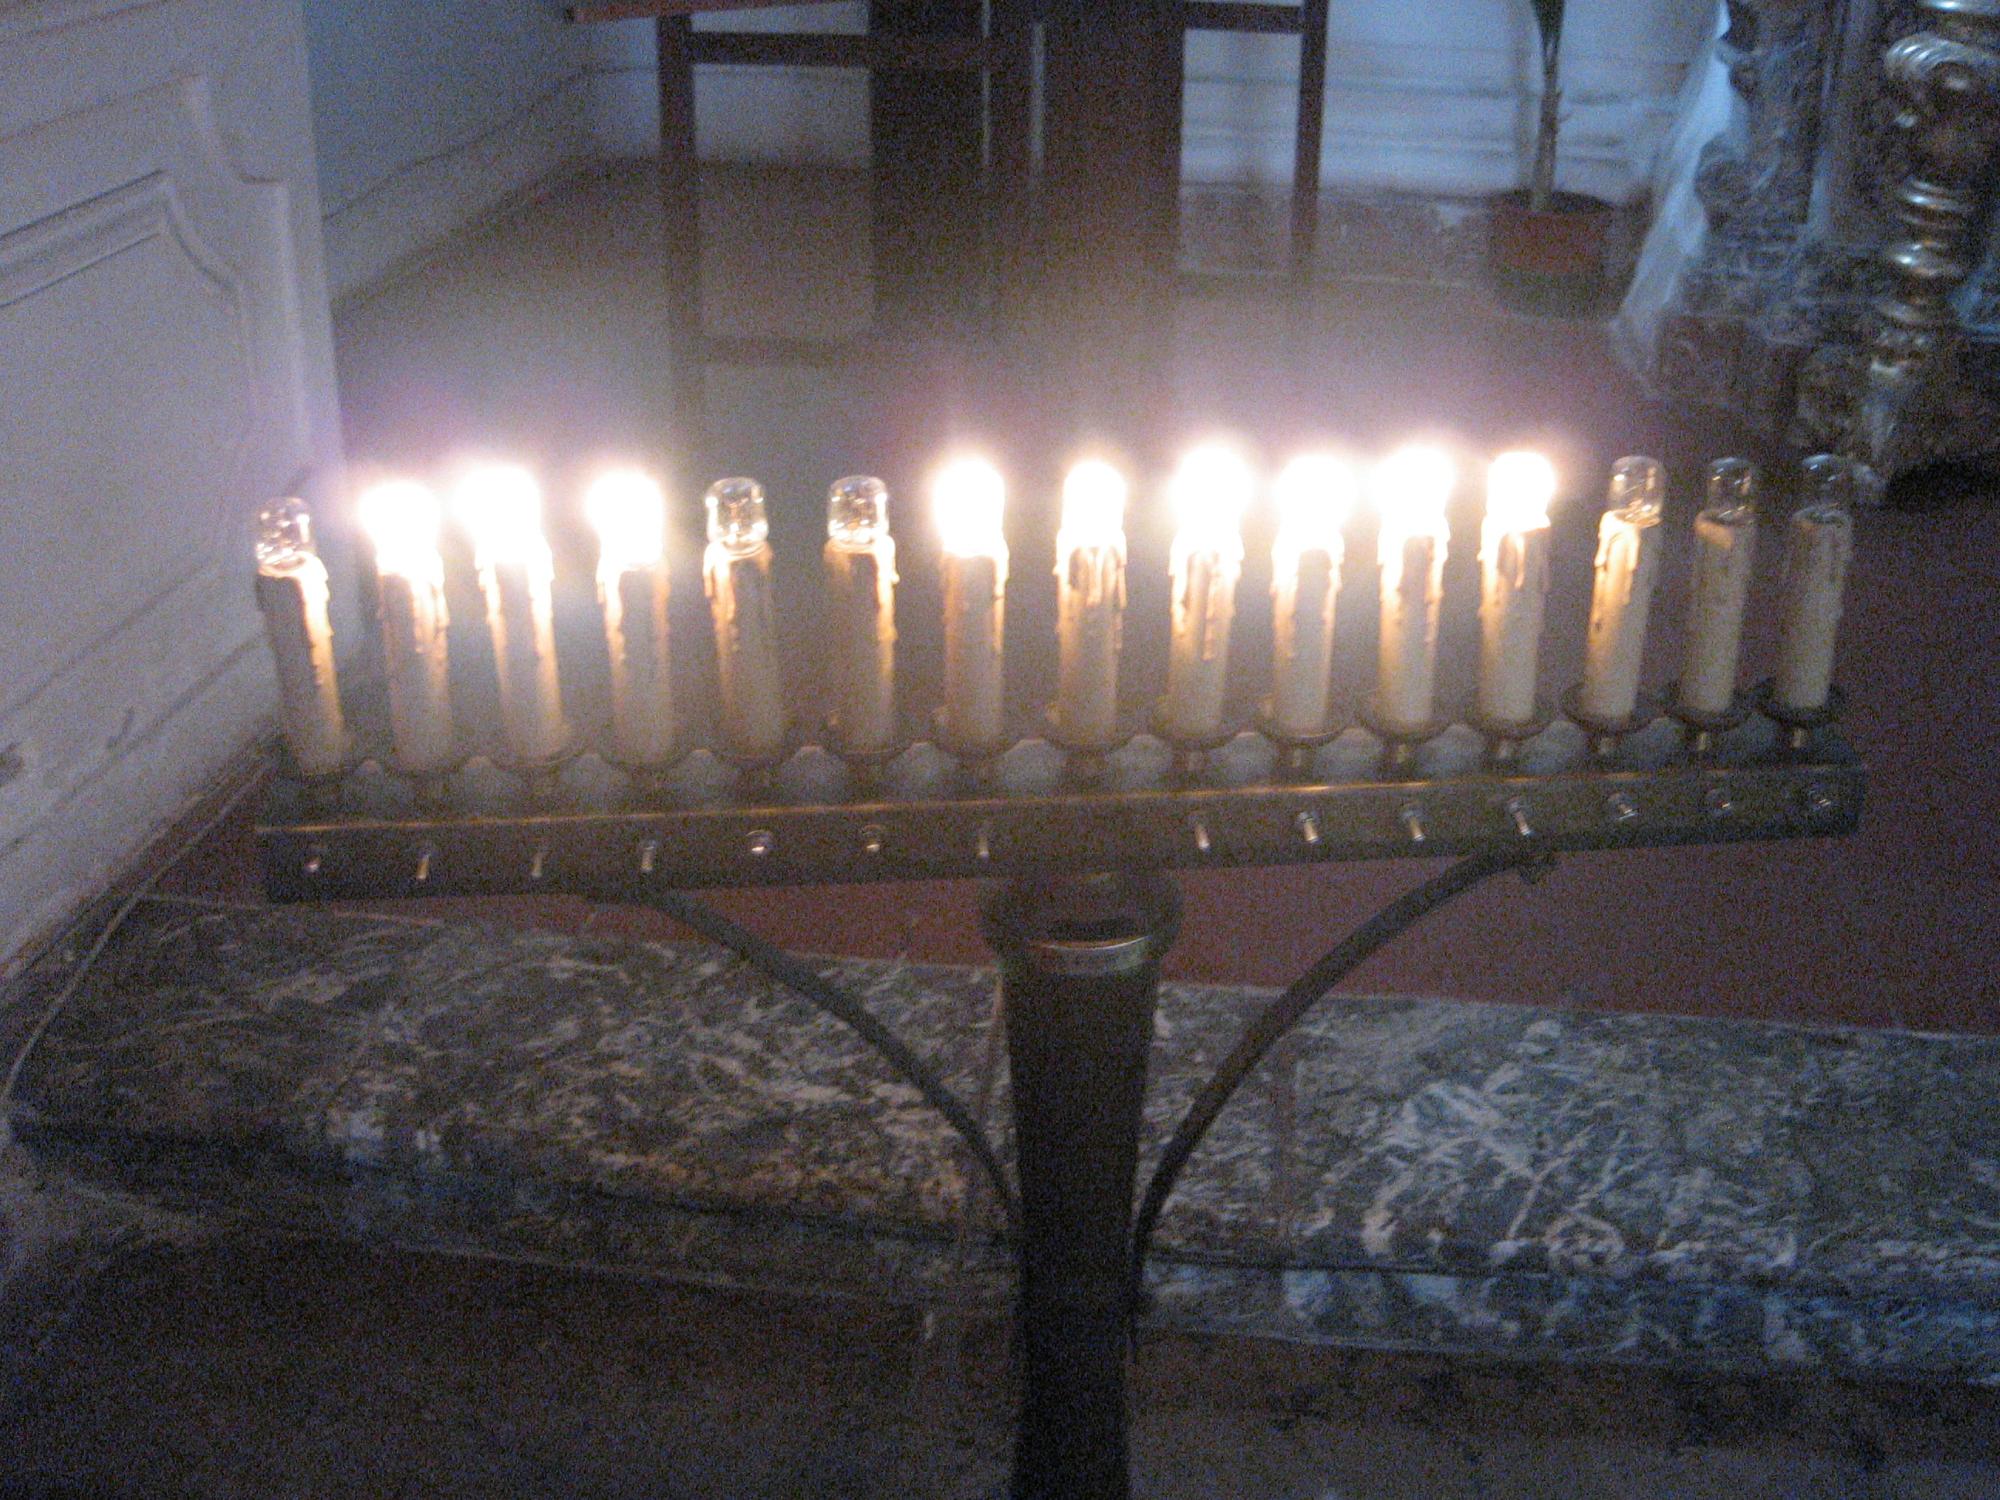 Italy - Electric Candles For Prayer